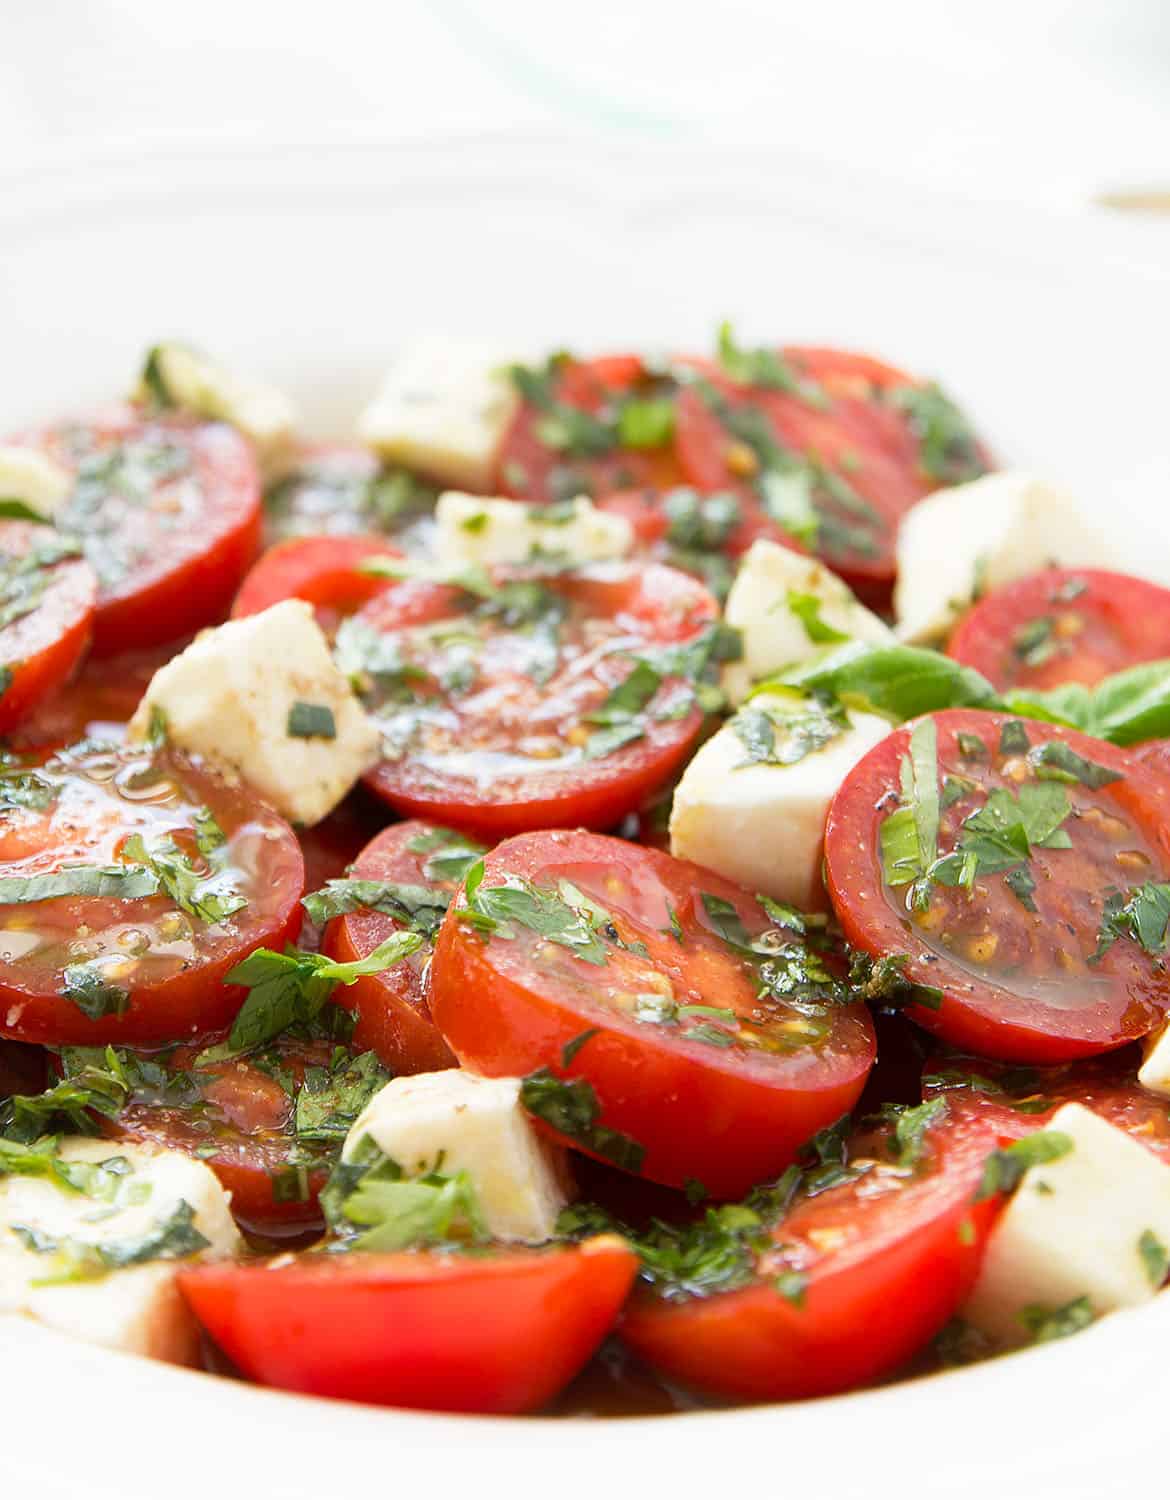 Marinated tomato salad on a white plate over a total white background.